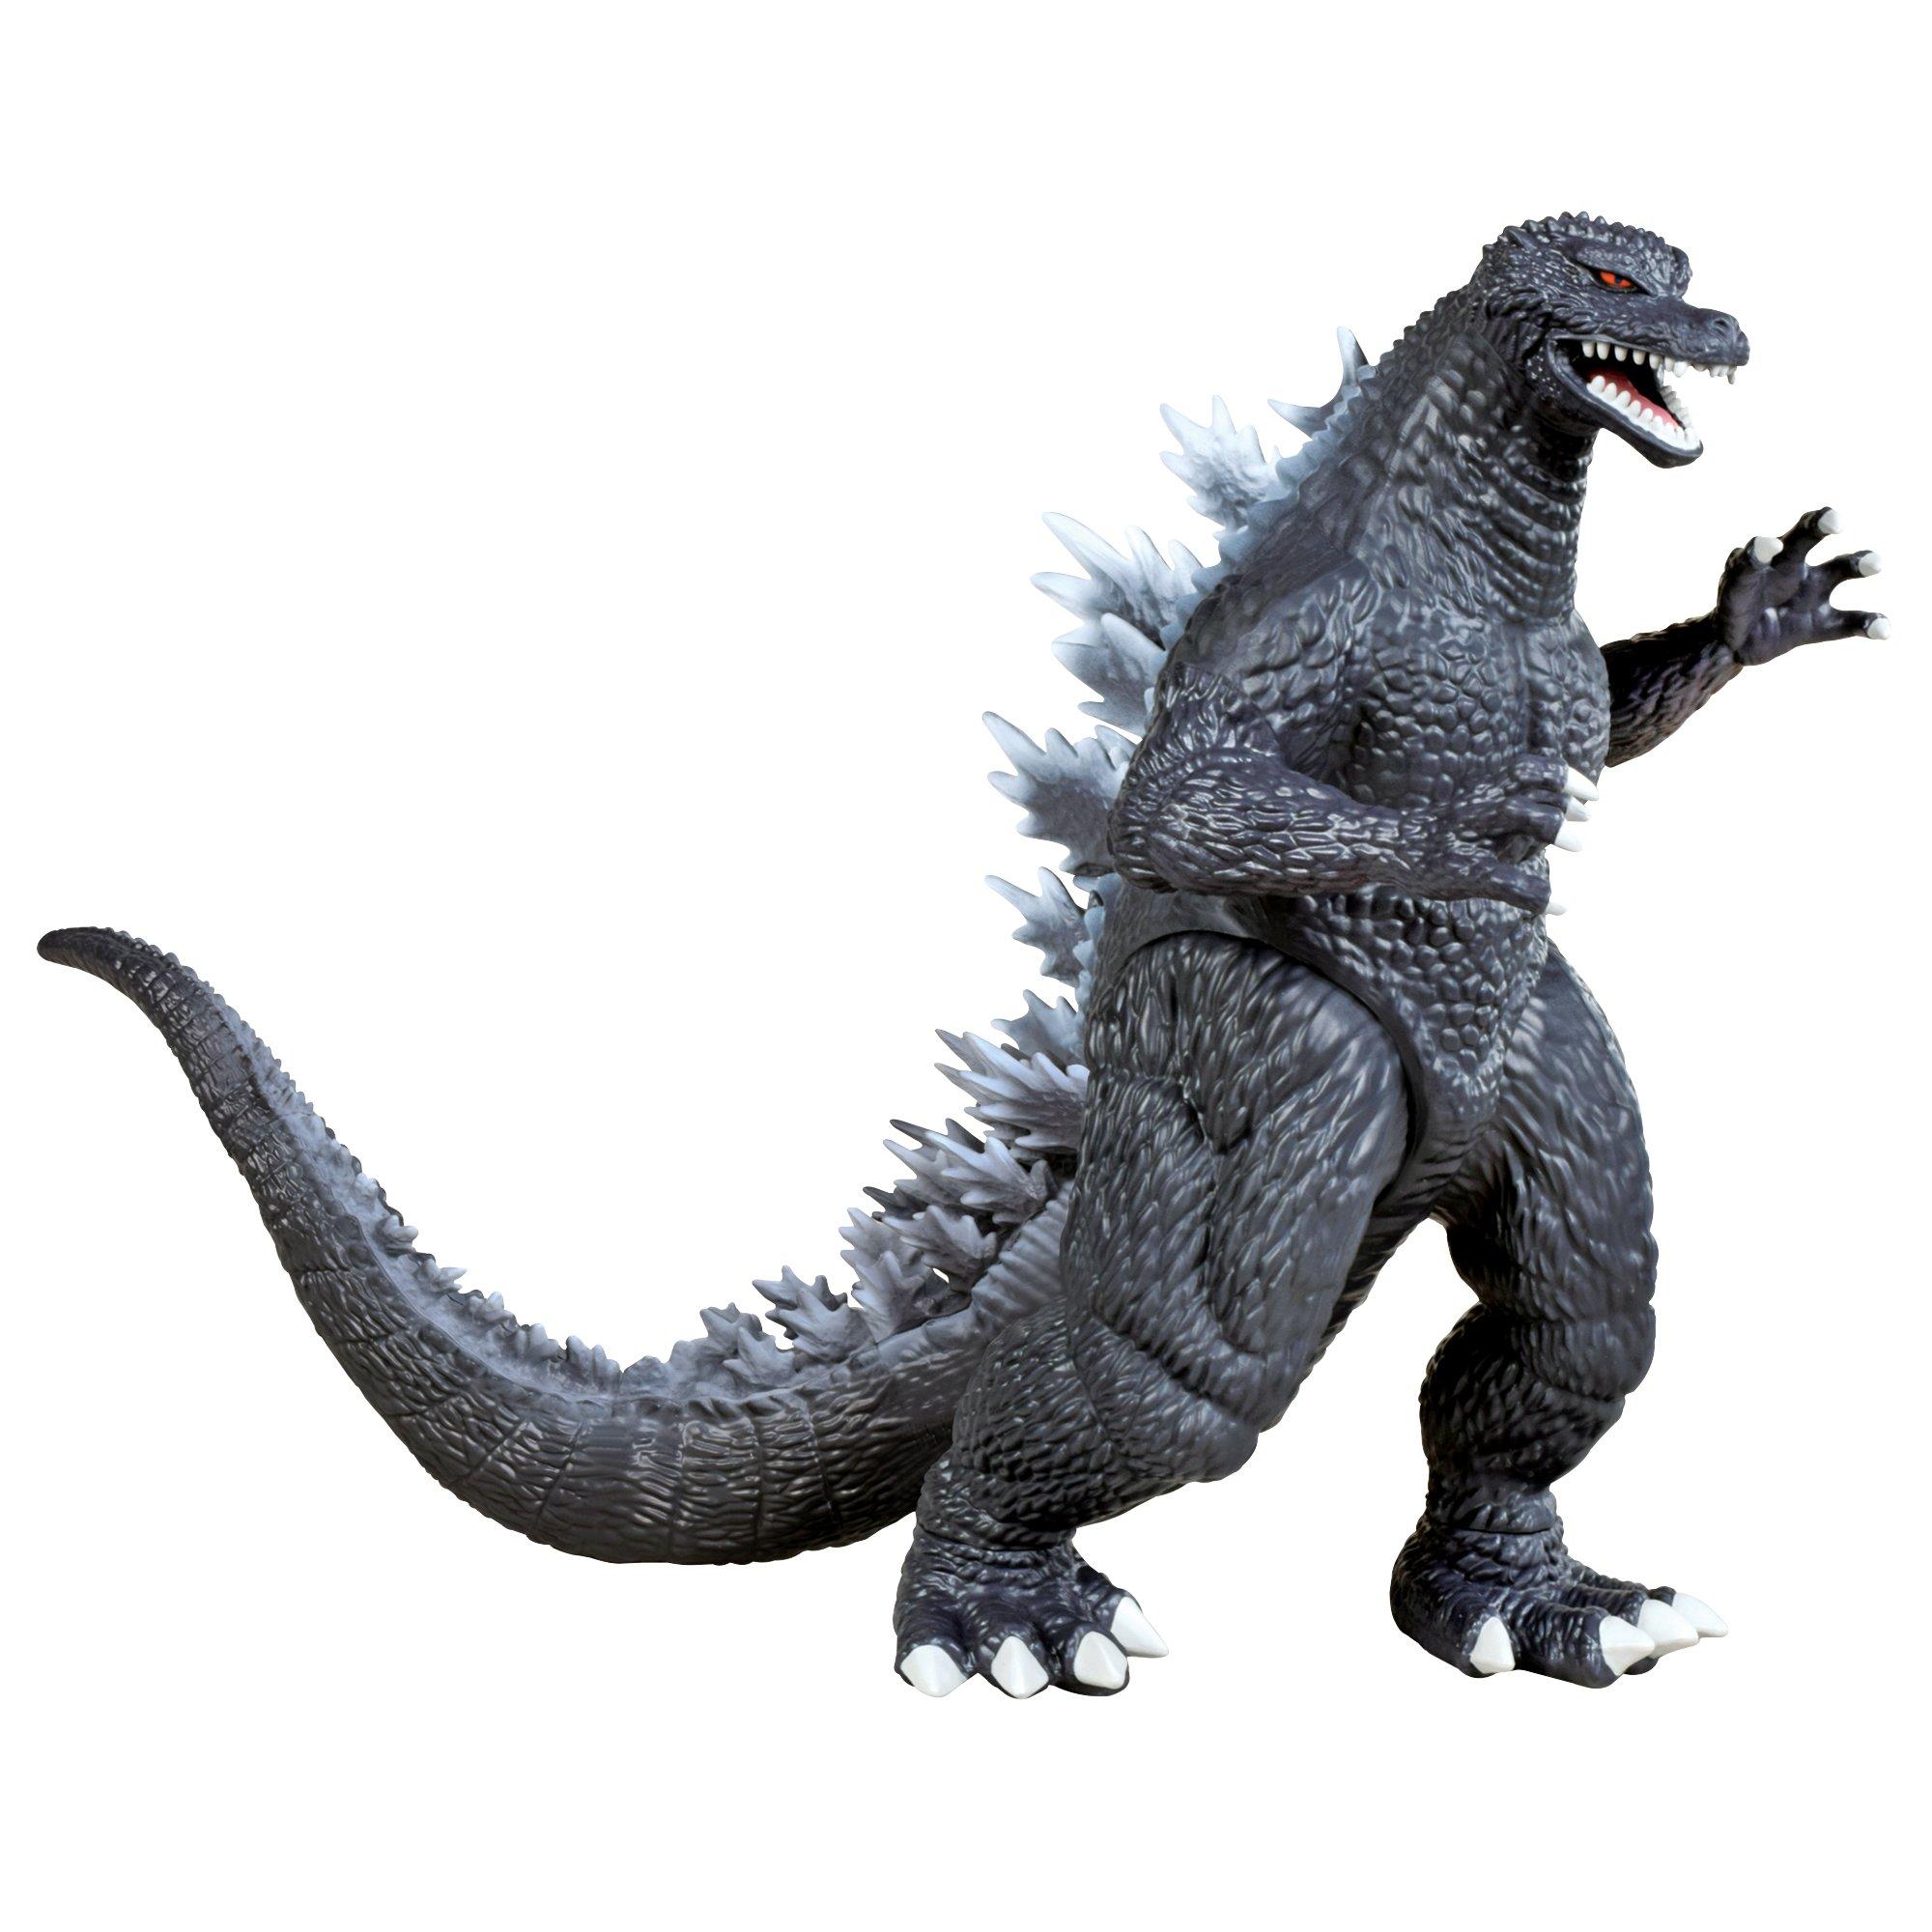 Playmates Toys Godzilla Final Wars 7 Action Figure 65th Celebration Edition for sale online 